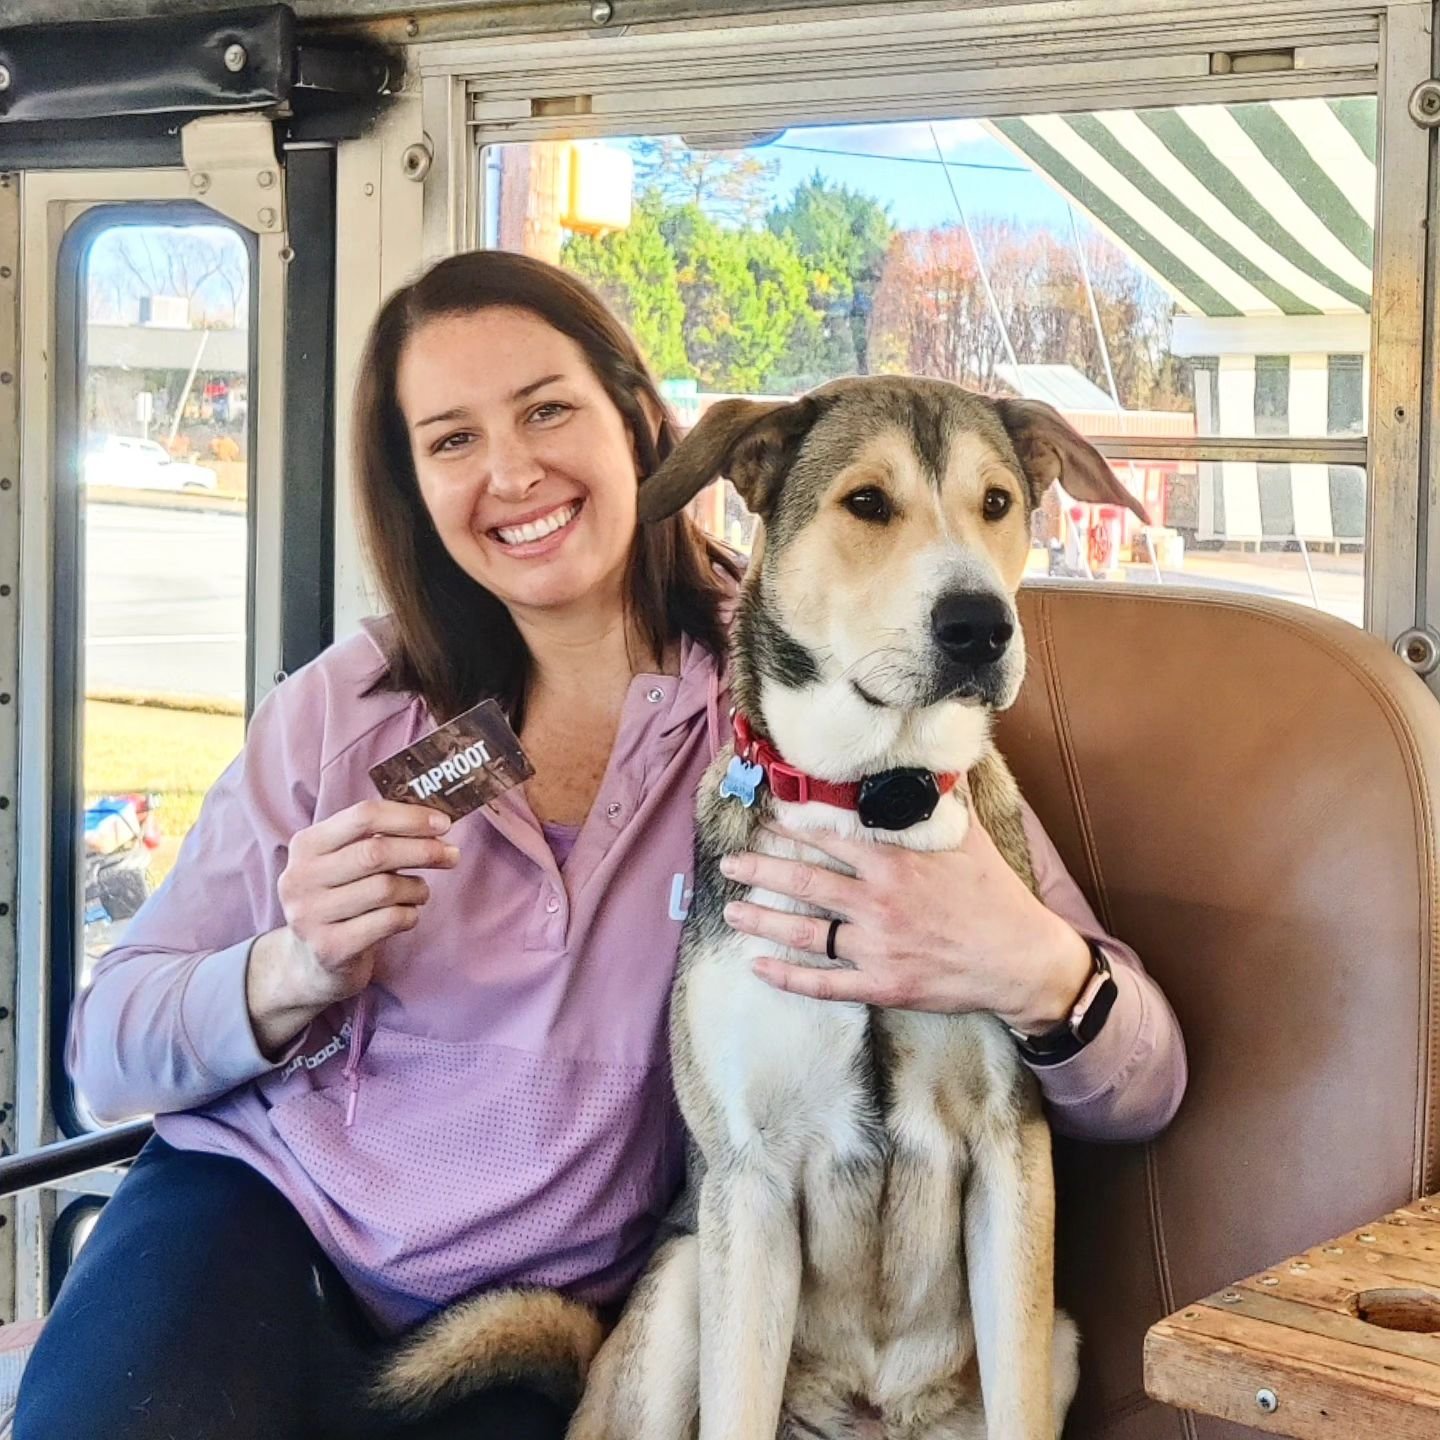 If you visit the Bus, you might meet Erica! Affectionately referred to as one of the &quot;workout moms&quot;, Erica likes an espresso in her protein shake. She is also a pro at guessing dog weights.

Erica recently won a long running and fierce comp